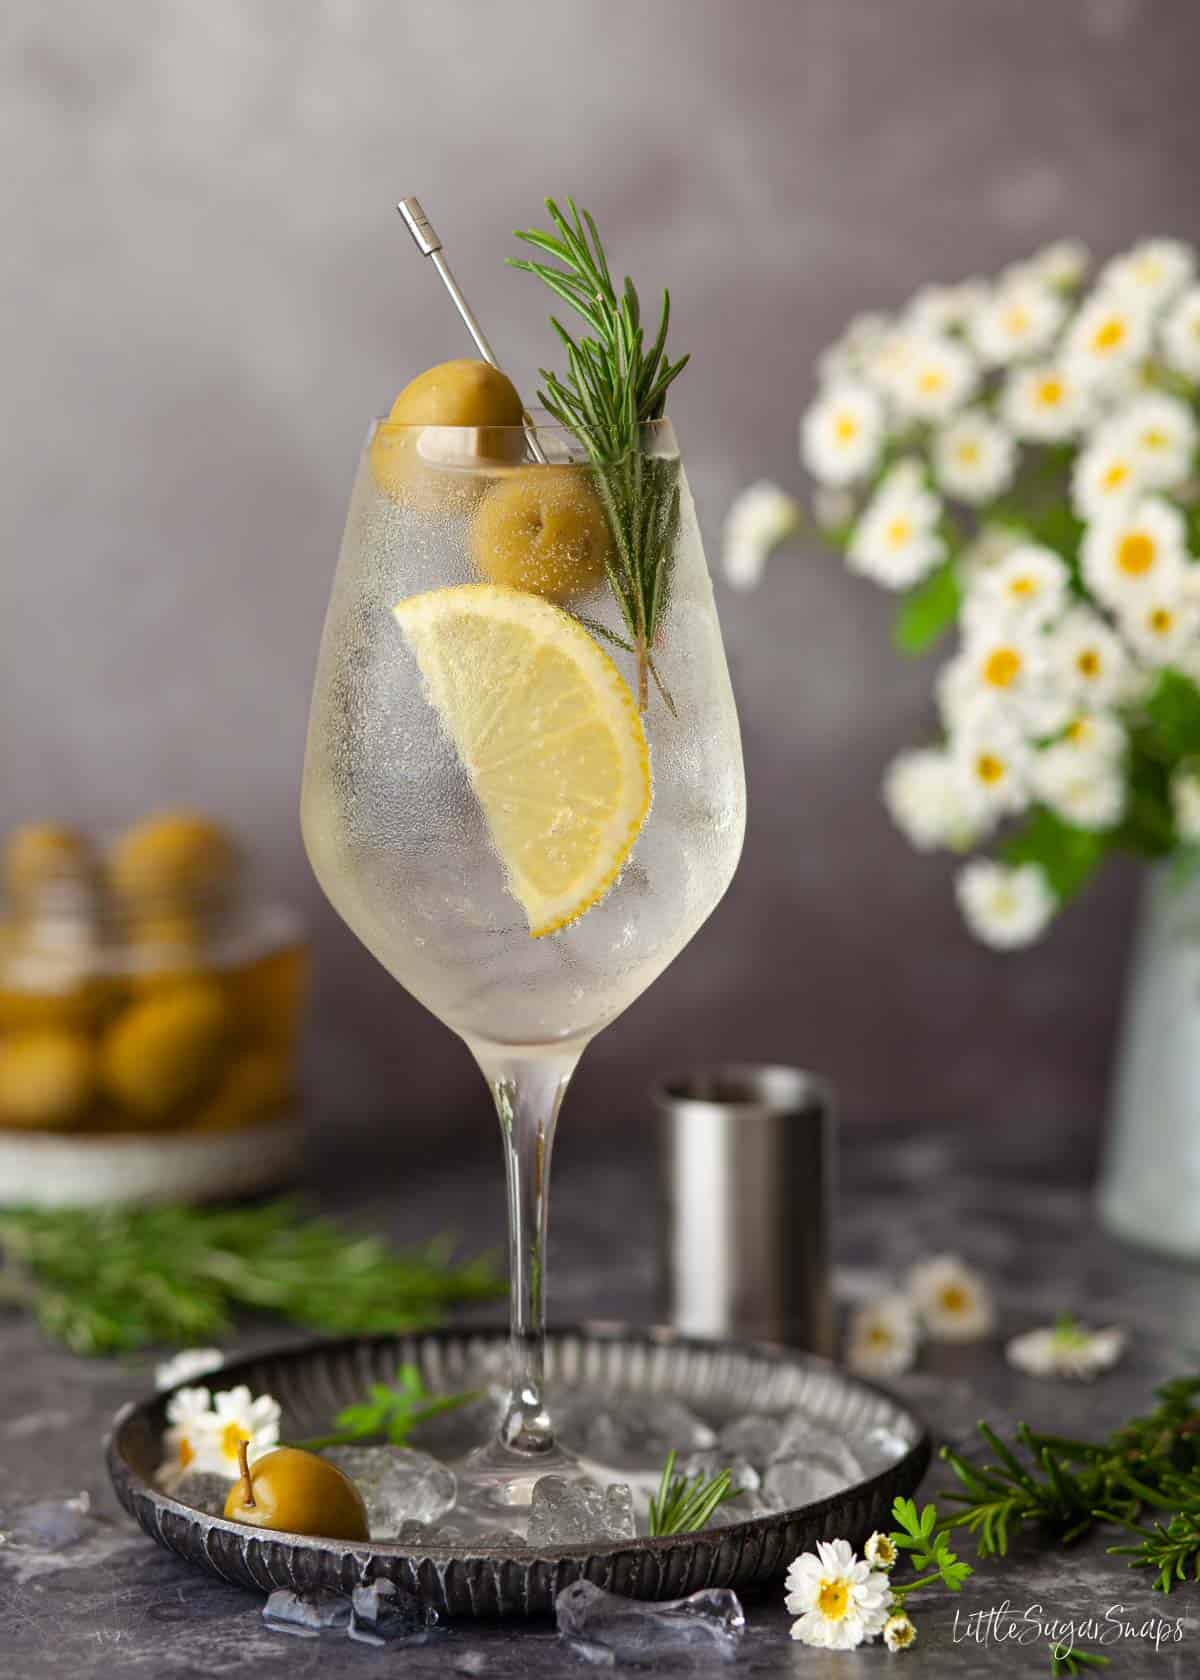 A spritz Veneziano made with bitter bianco and garnished with lemon.